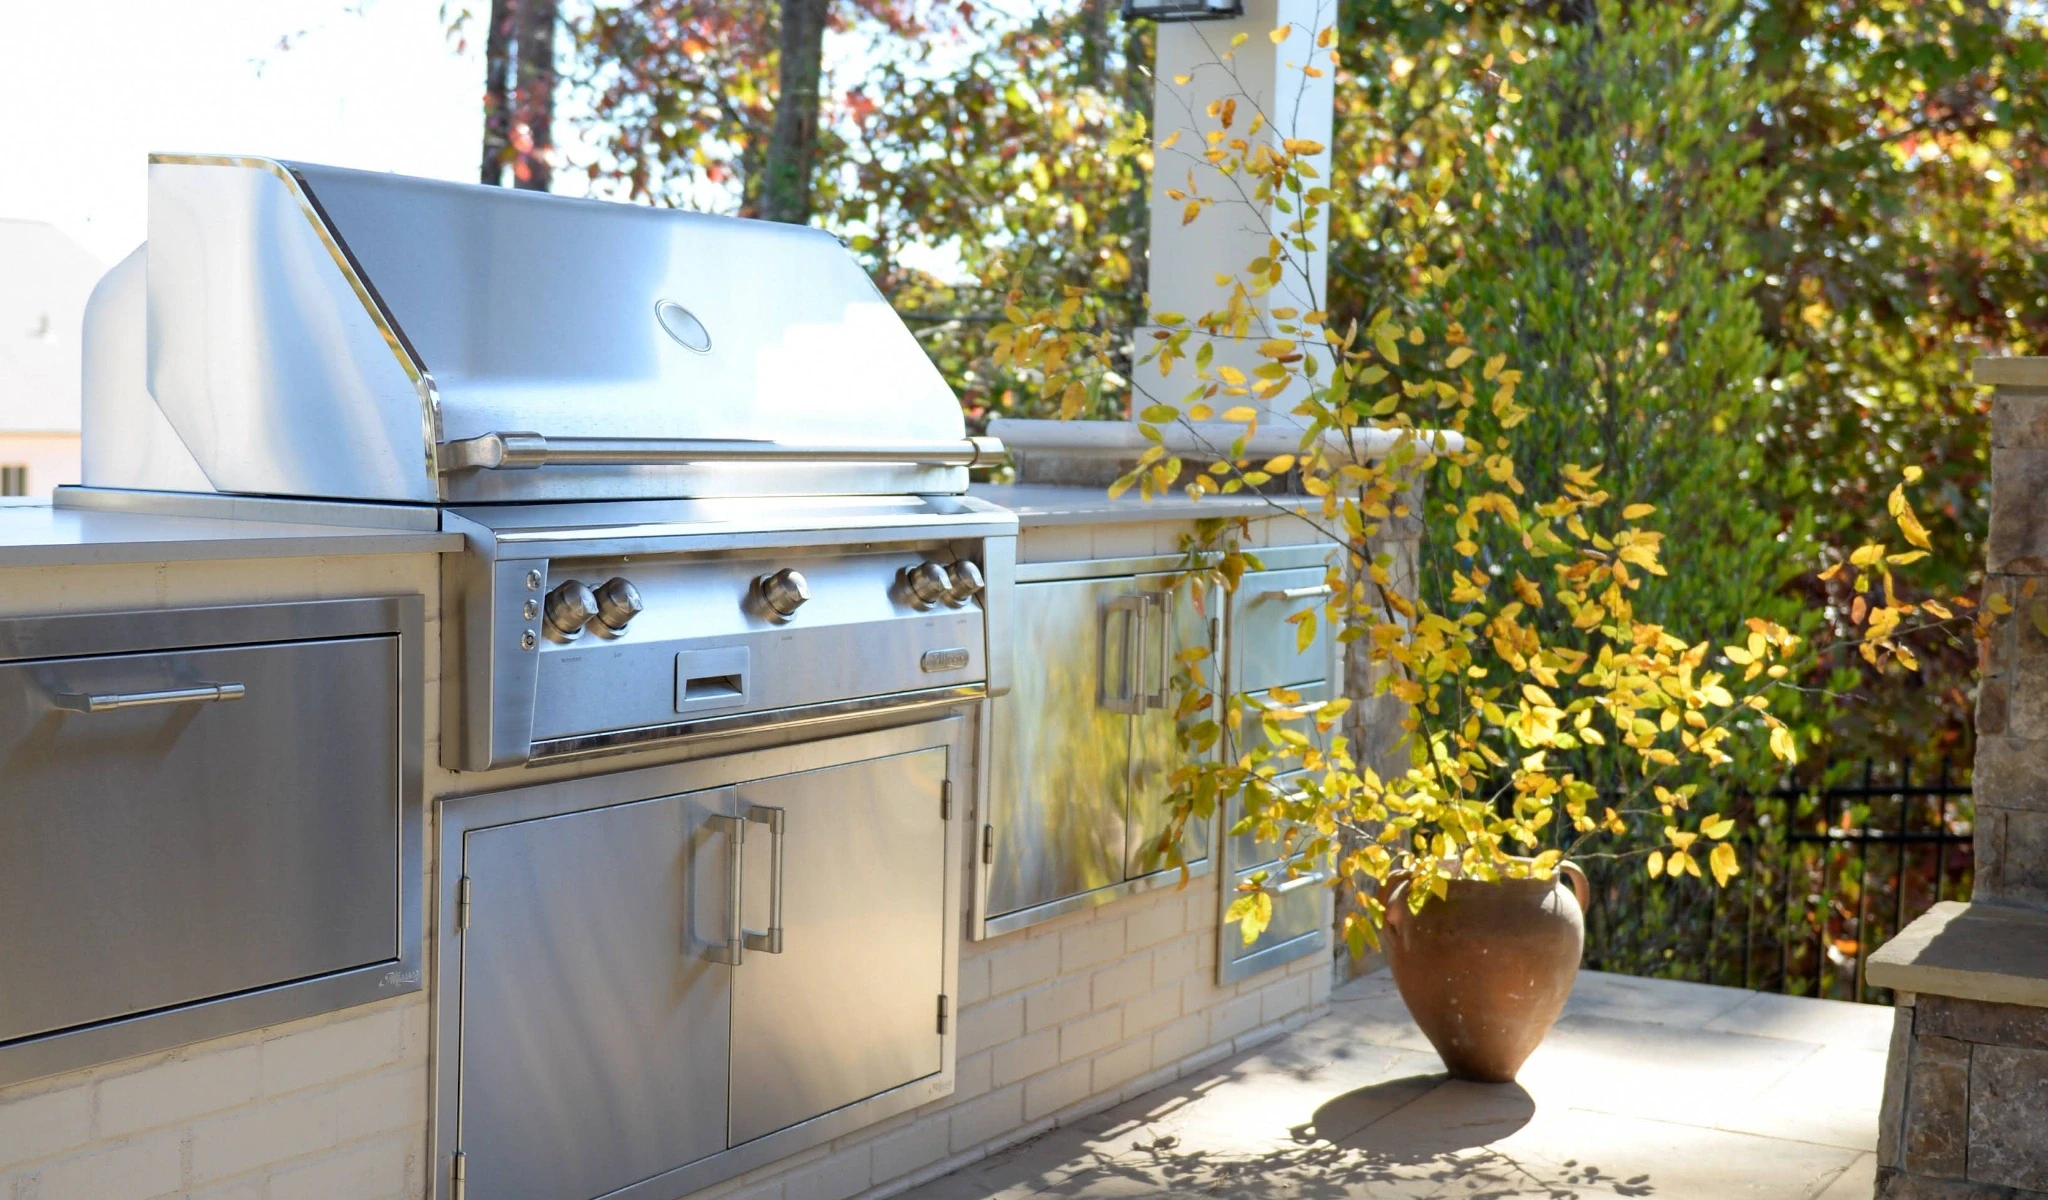 A stainless steel BBQ grill.